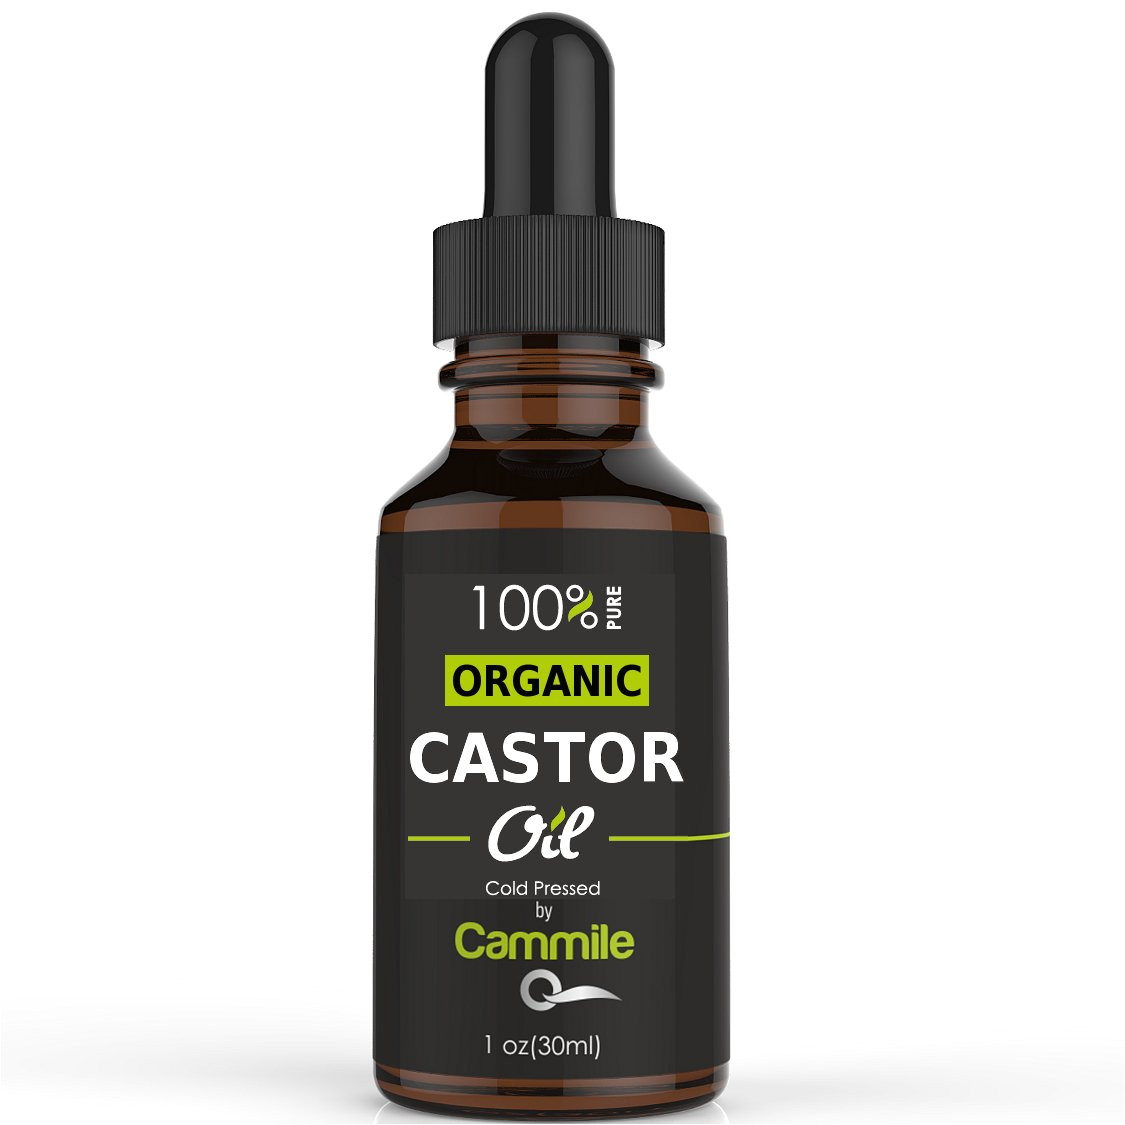 Fuller Brush Products Phone Number Amazon Com organic Castor Oil for Hair Eyelashes and Eyebrows